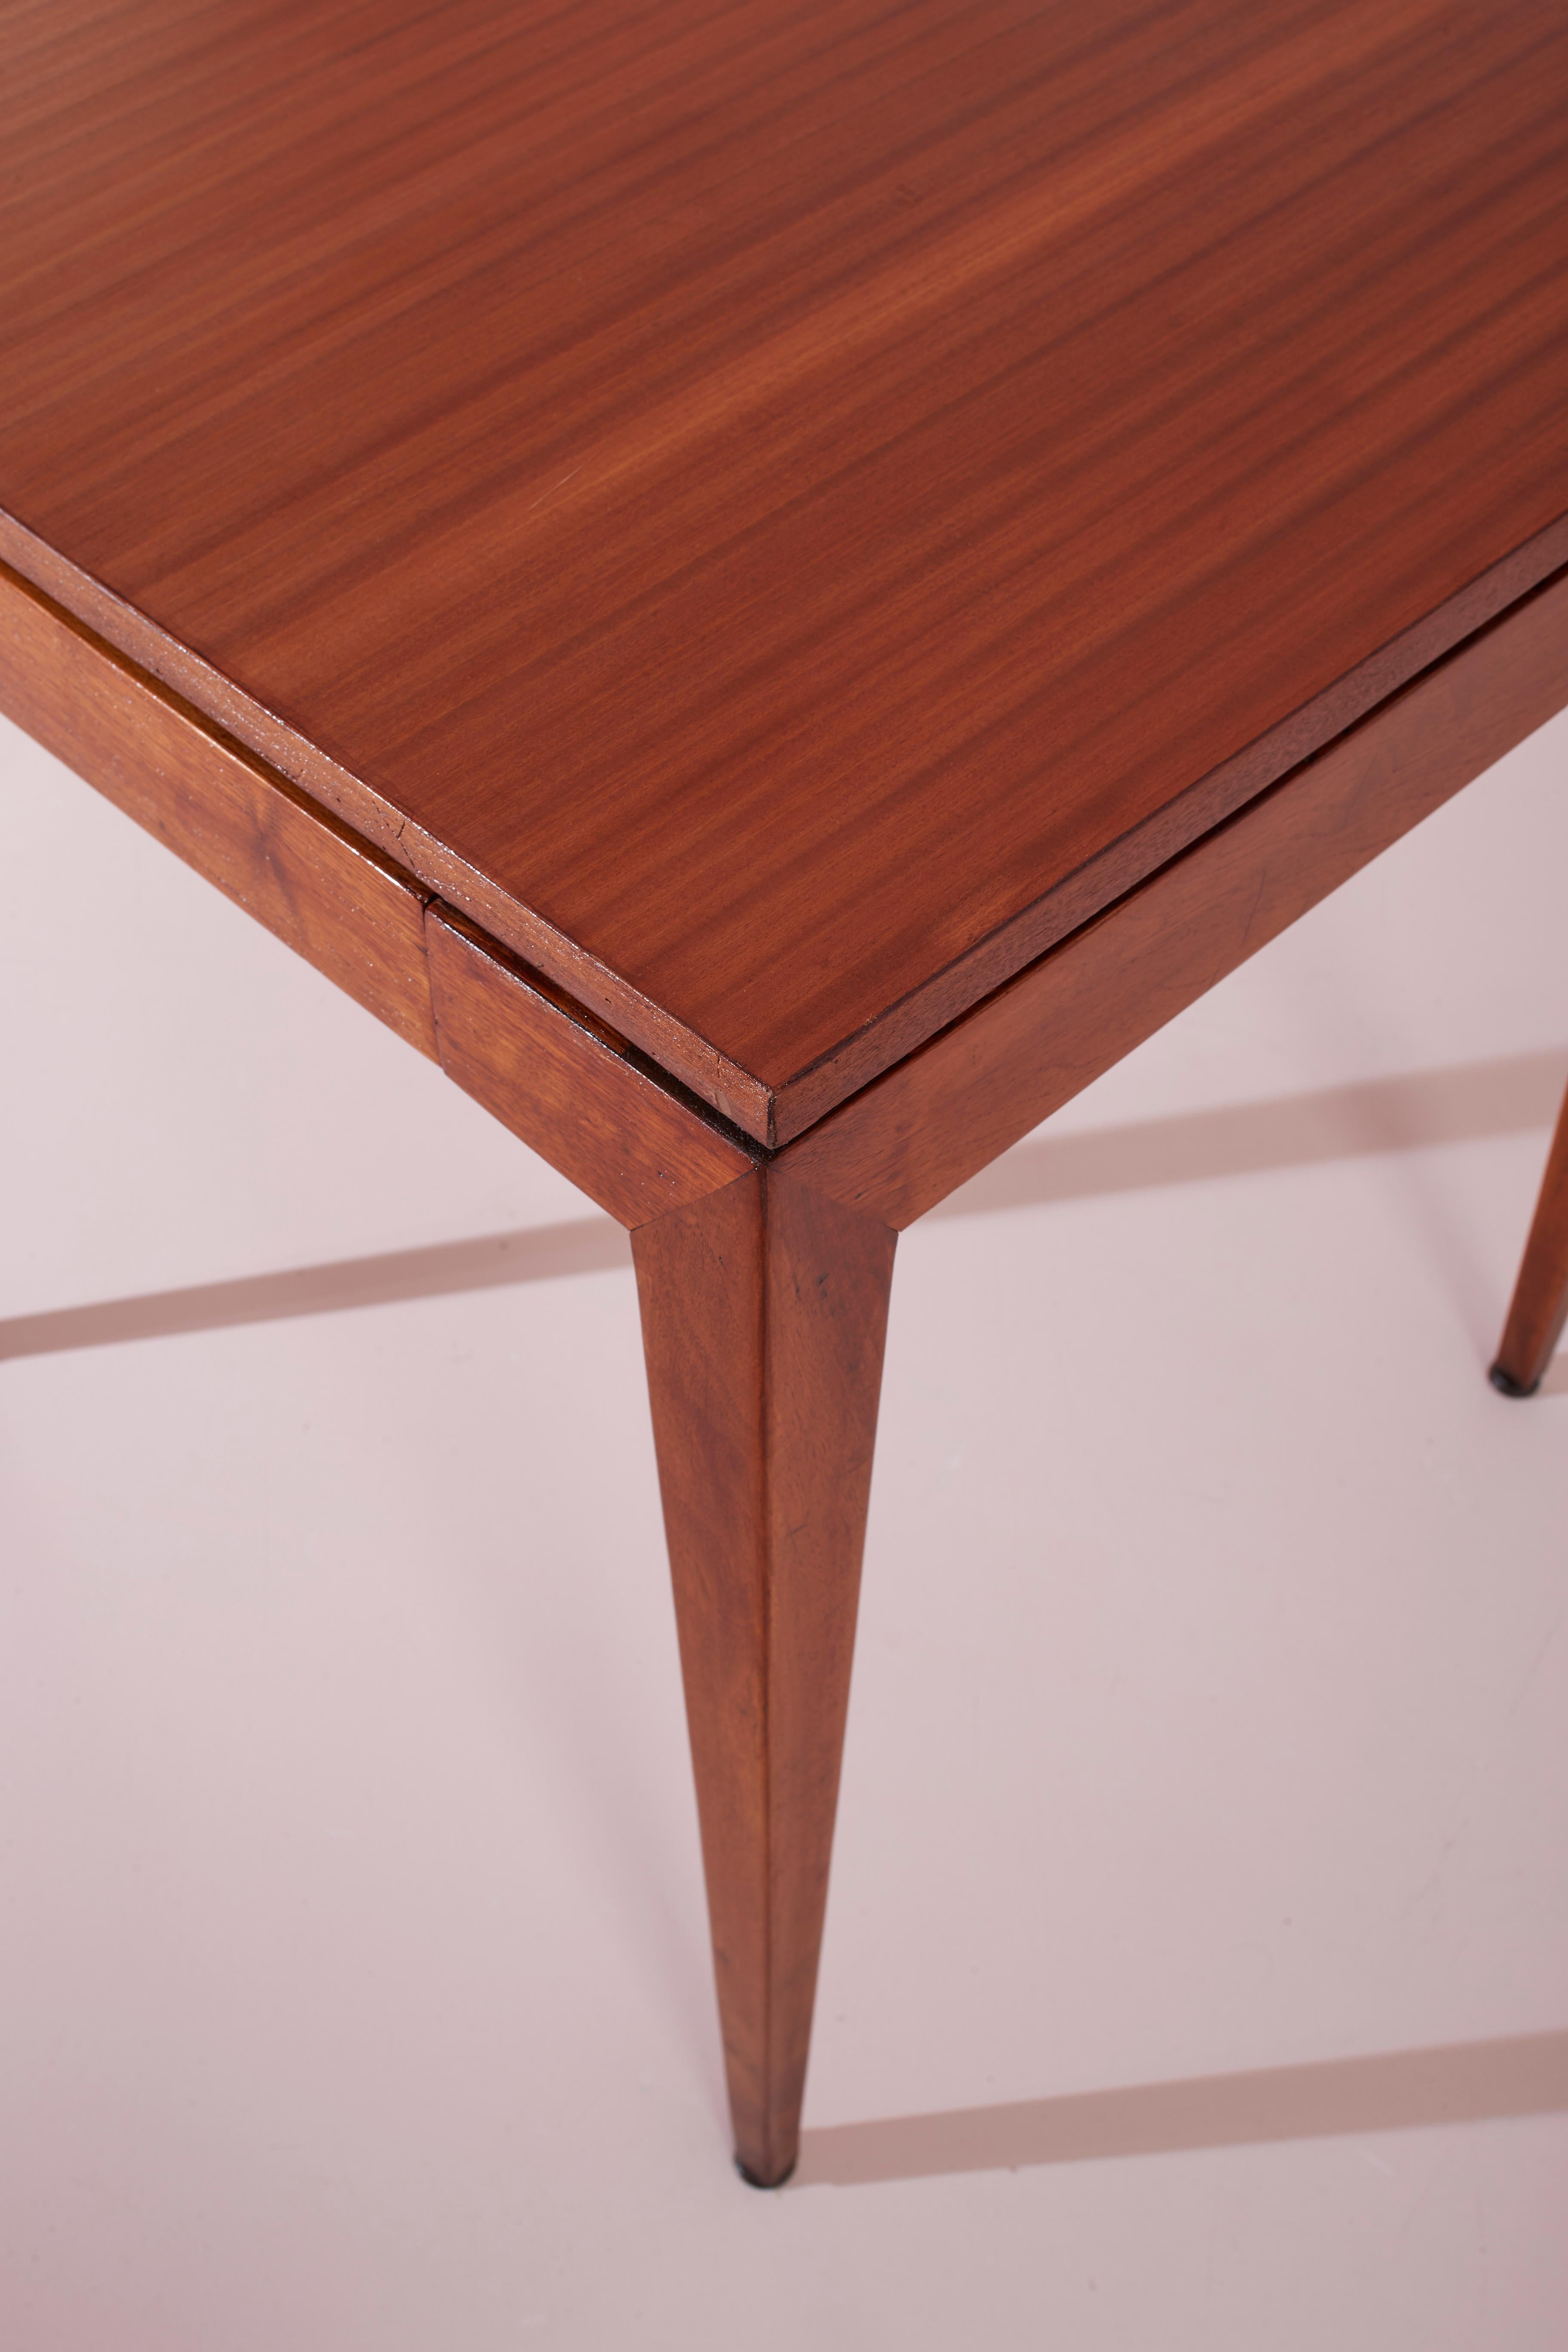 GIo Ponti walnut occasional table for the Cavalieri Hotel in Milan, Italy, 1950s For Sale 5